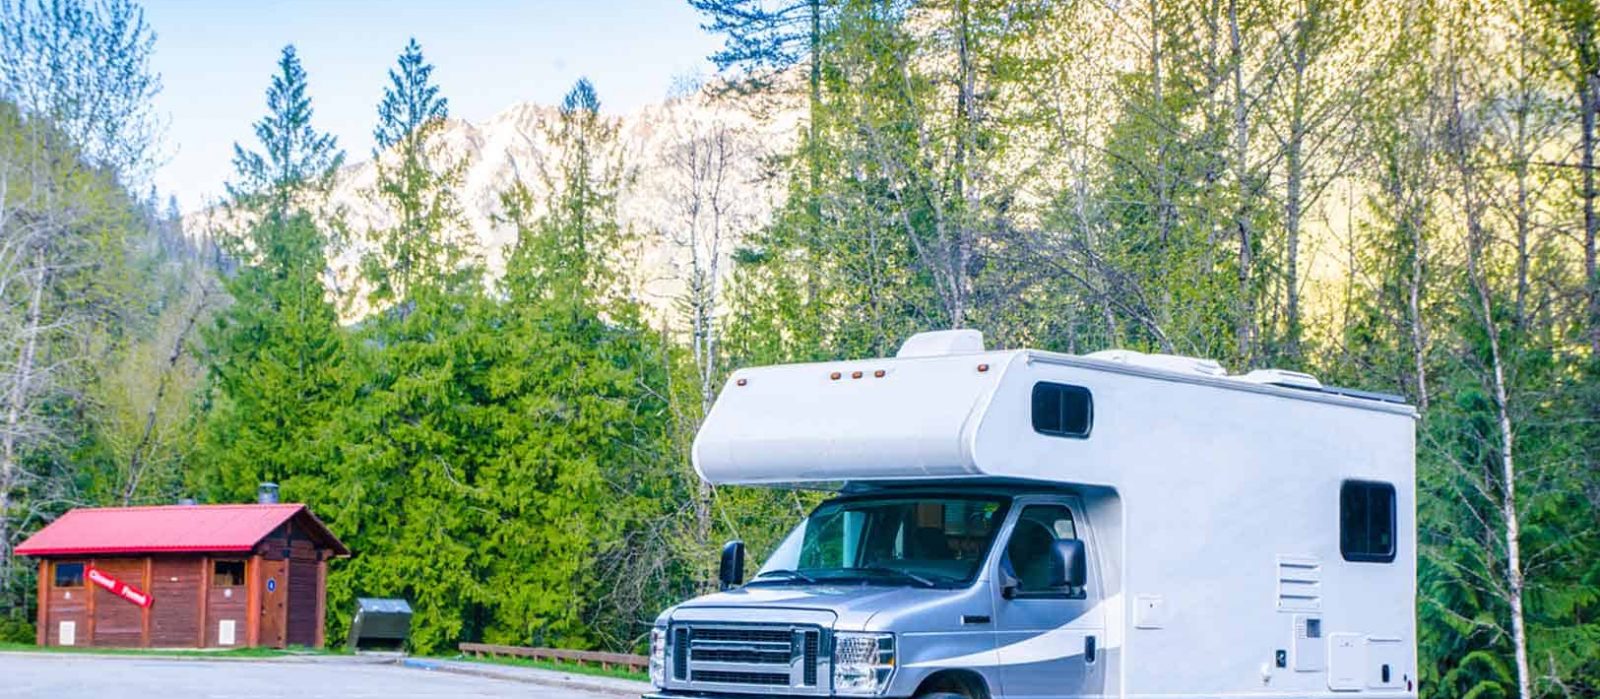 where to park an RV for free